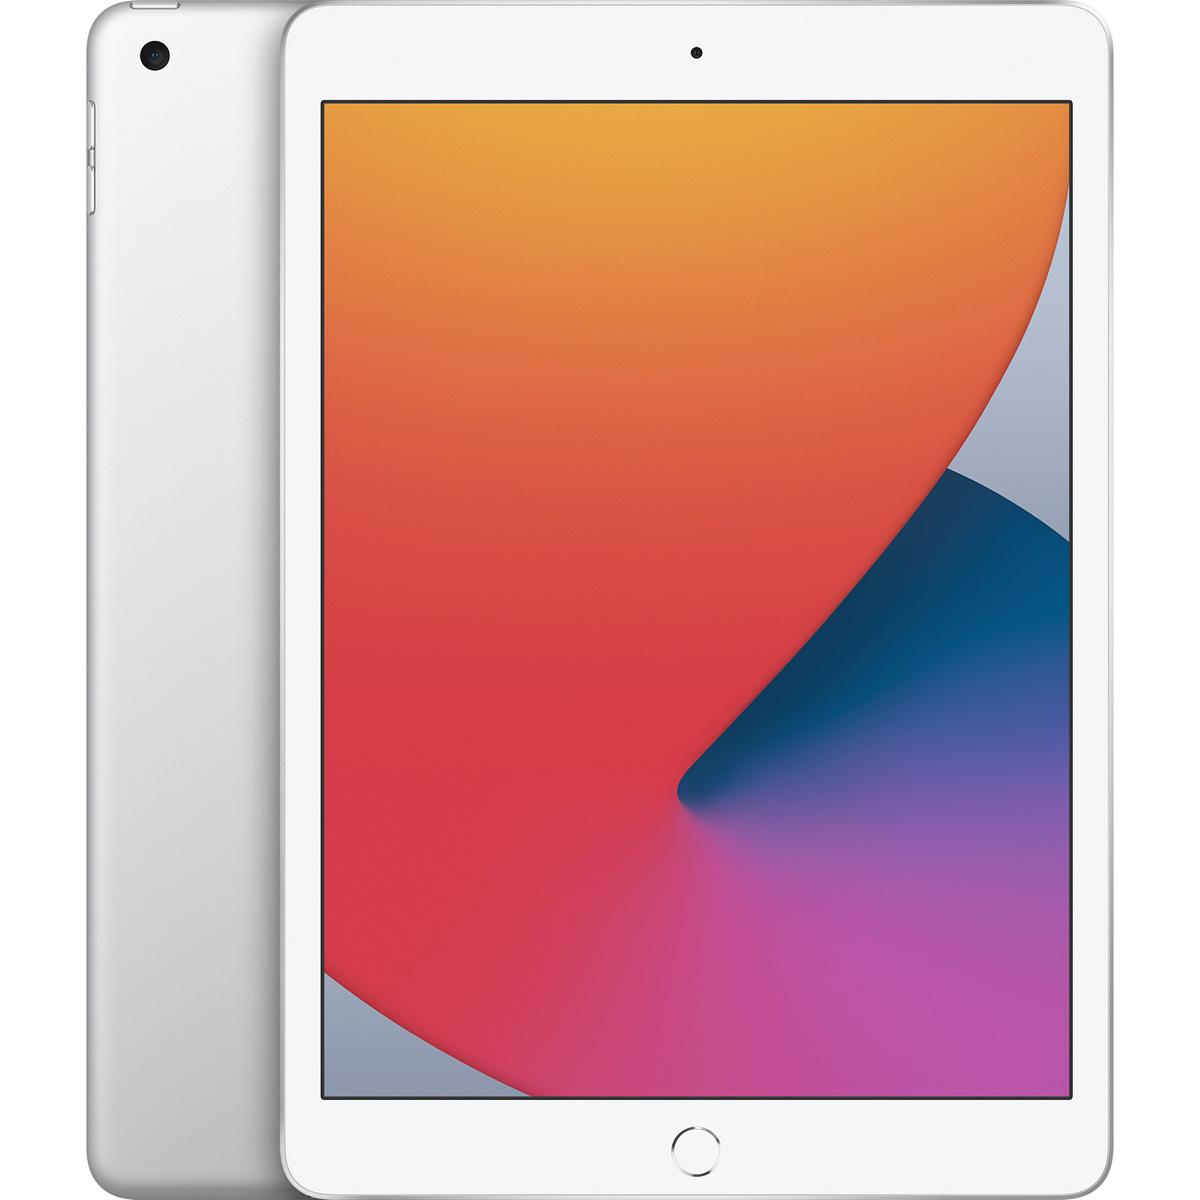 128GB Apple iPad 8th Gen 10.2in Wi-Fi Tablet for $349 Shipped